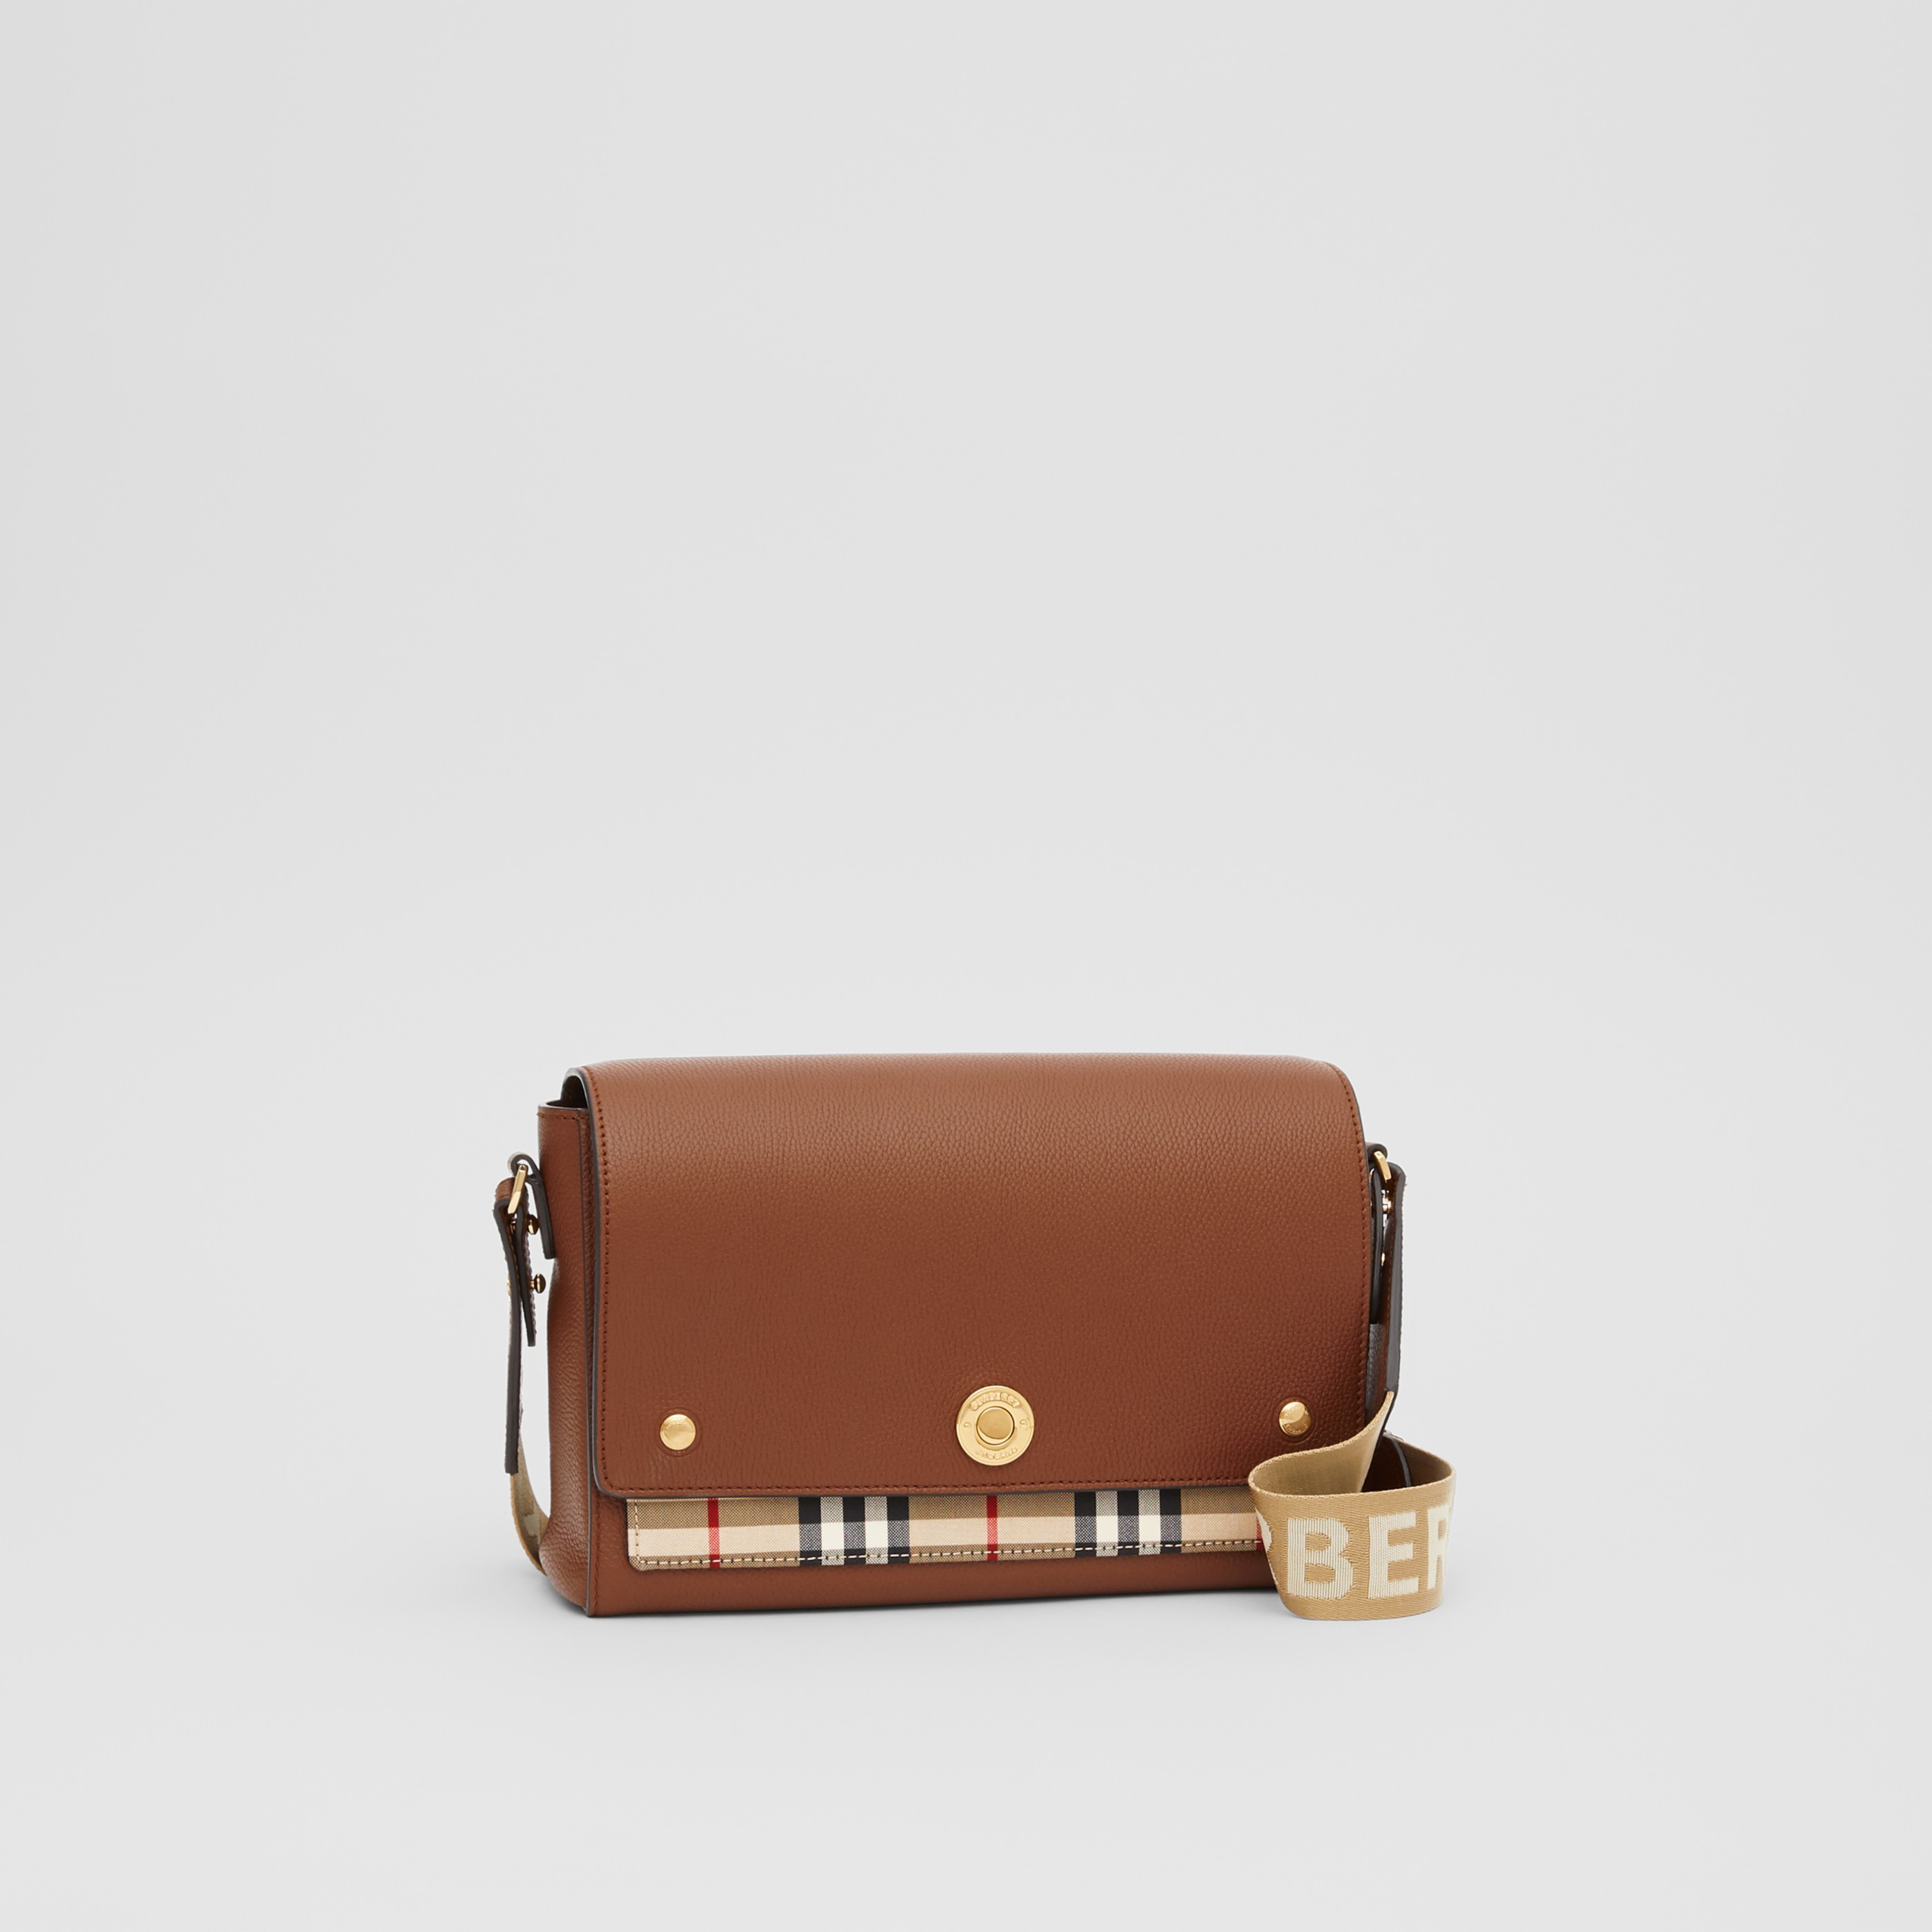 Monica Prevail sympati Leather and Vintage Check Note Crossbody Bag in Tan - Women | Burberry